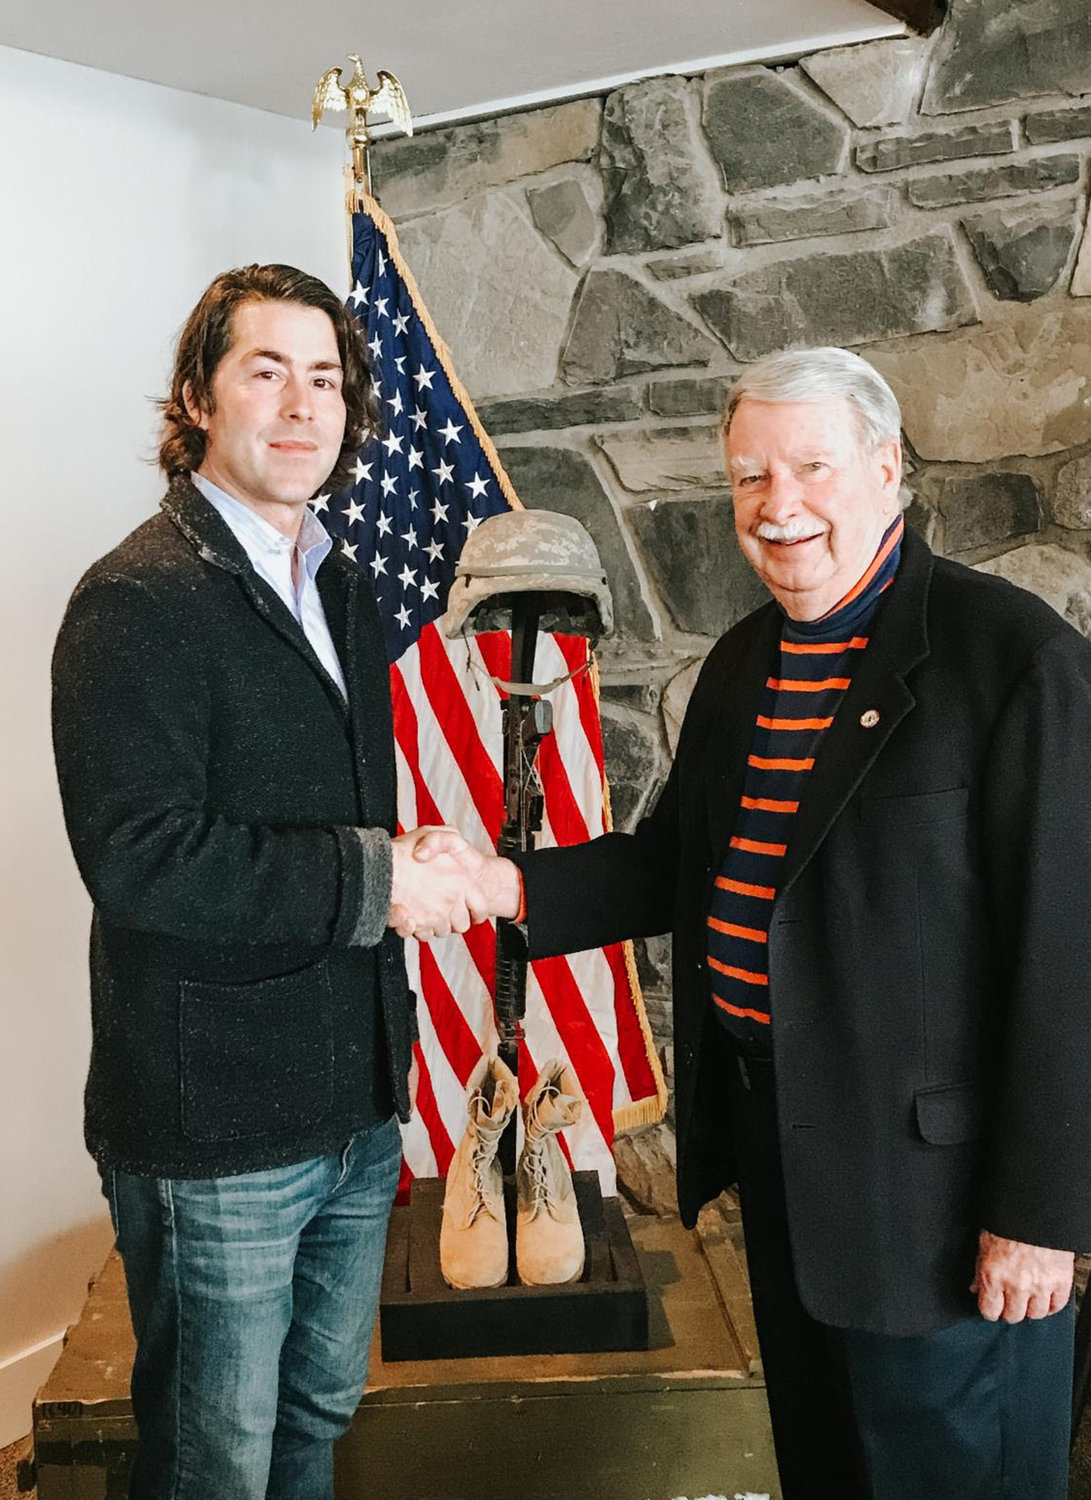 HISTORIC HELP — Garrett Law, left, shakes hands with Clear Path for Veterans CEO Bill Smullen. Law recently acquired “This Old Church”, formerly the Vernon Center Presbyterian Church and has undertaken the task of restoring it.